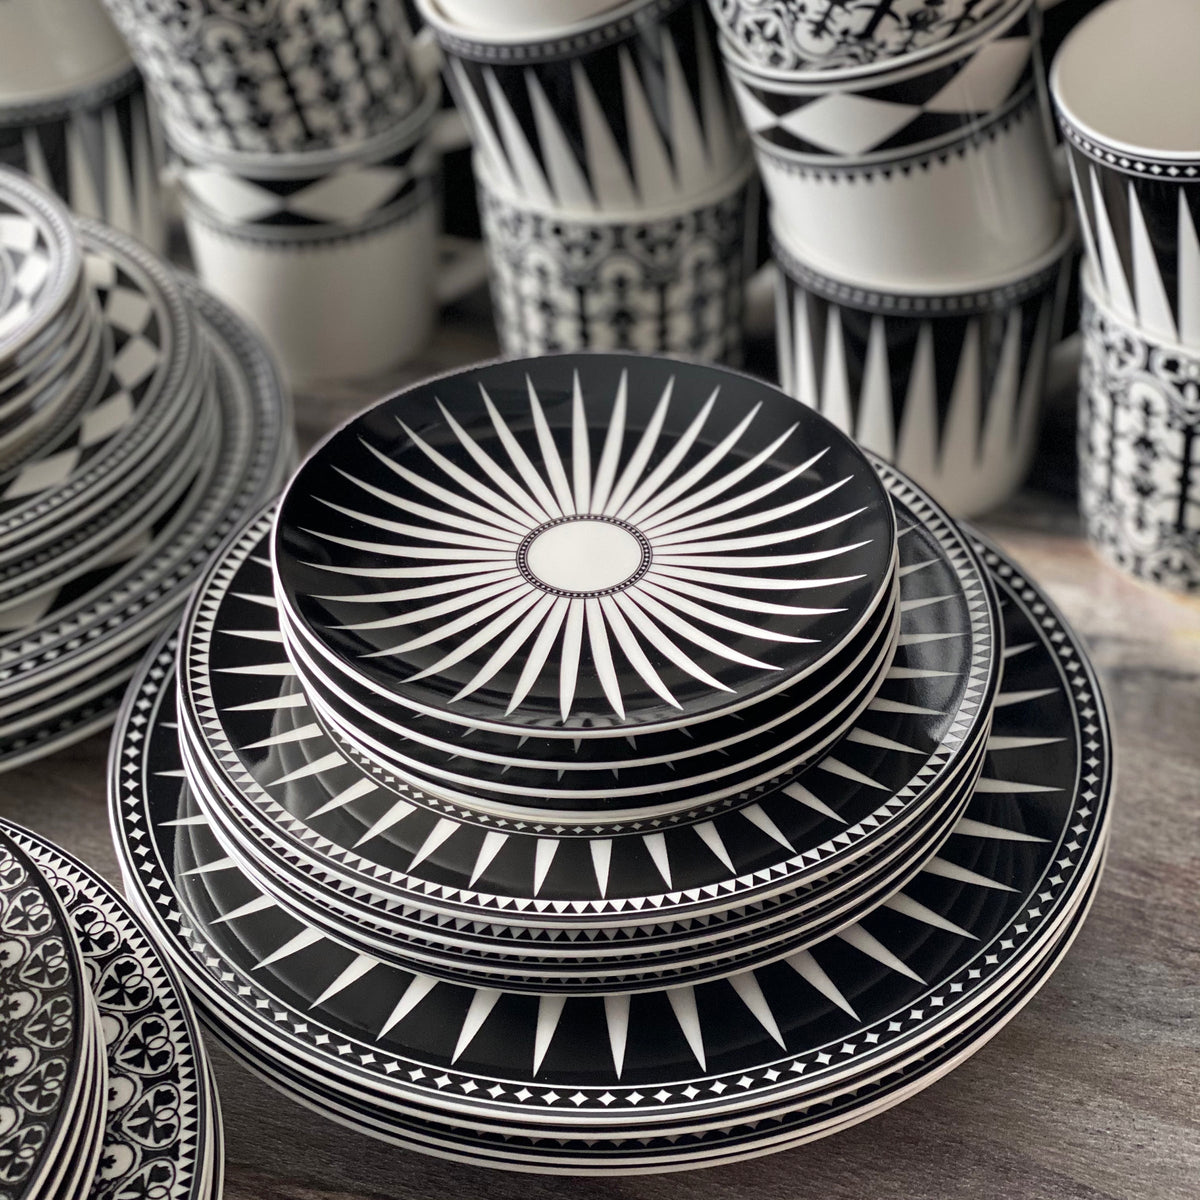 A stylish collection of Marrakech Canapé Plates from Caskata Artisanal Home, including black and white plates and cups, adorns a table.